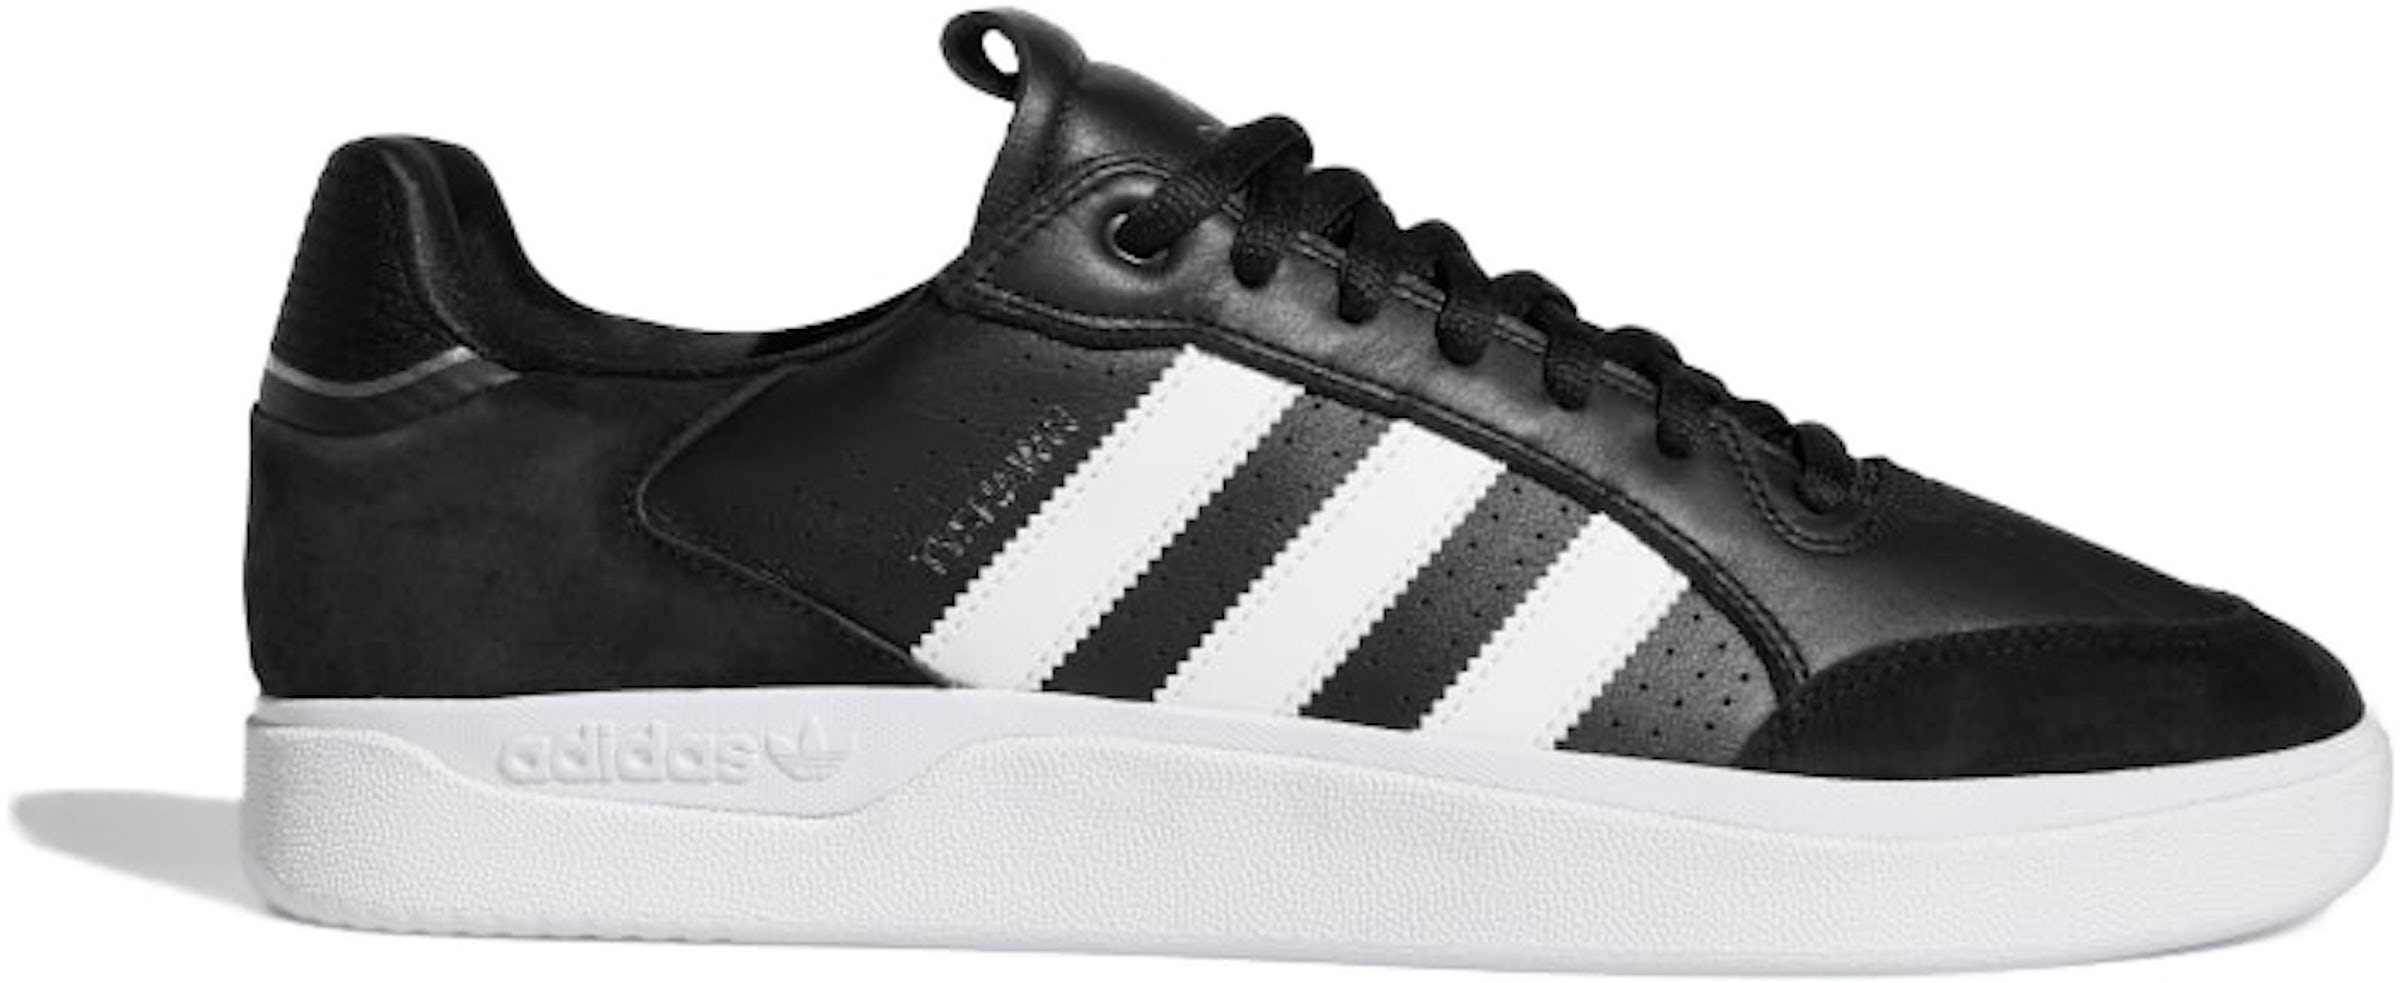 Buy adidas Skateboarding Size - Shoes 4.5 Sneakers & New StockX